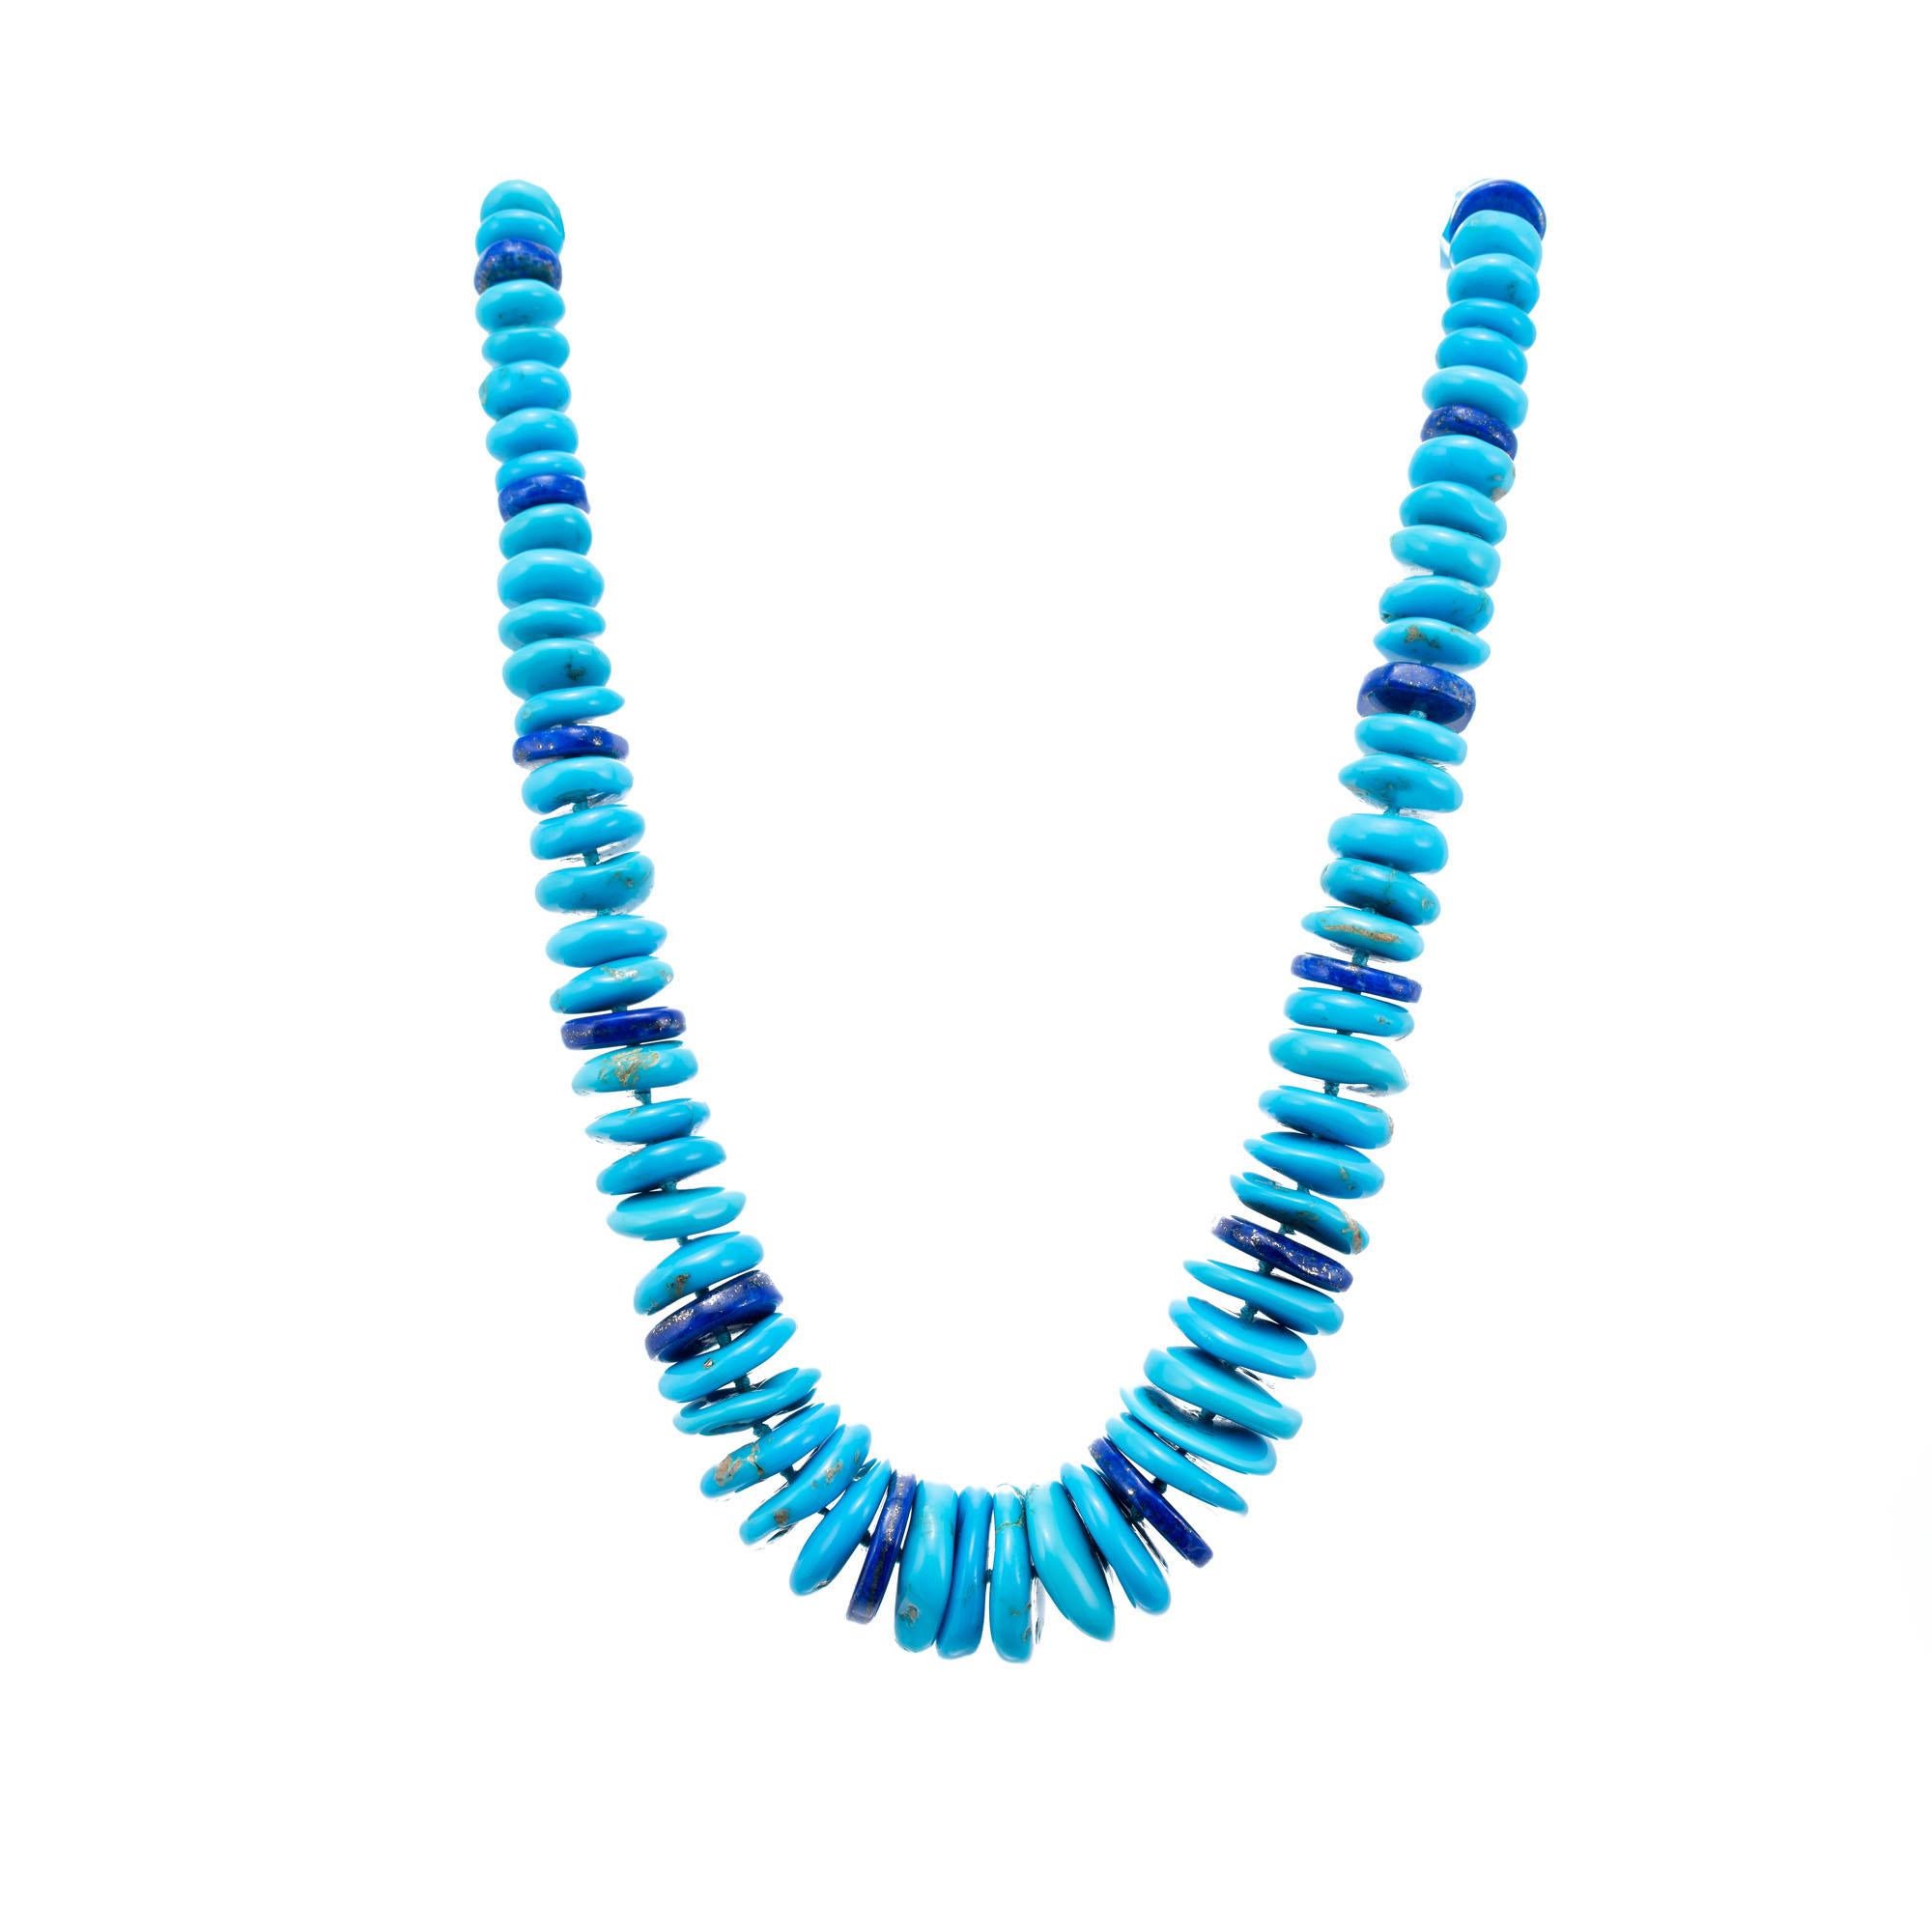 GIA certified turquoise and lapis necklace with 18k yellow gold catch. Graduated rondelle beads from 9.5 to 18.8mm. 19 inches. 

79 round greenish blue disc rondelle turquoise beads 9.7-18.9mm GIA Certificate # 2203127587
14 round disc rondelle dark